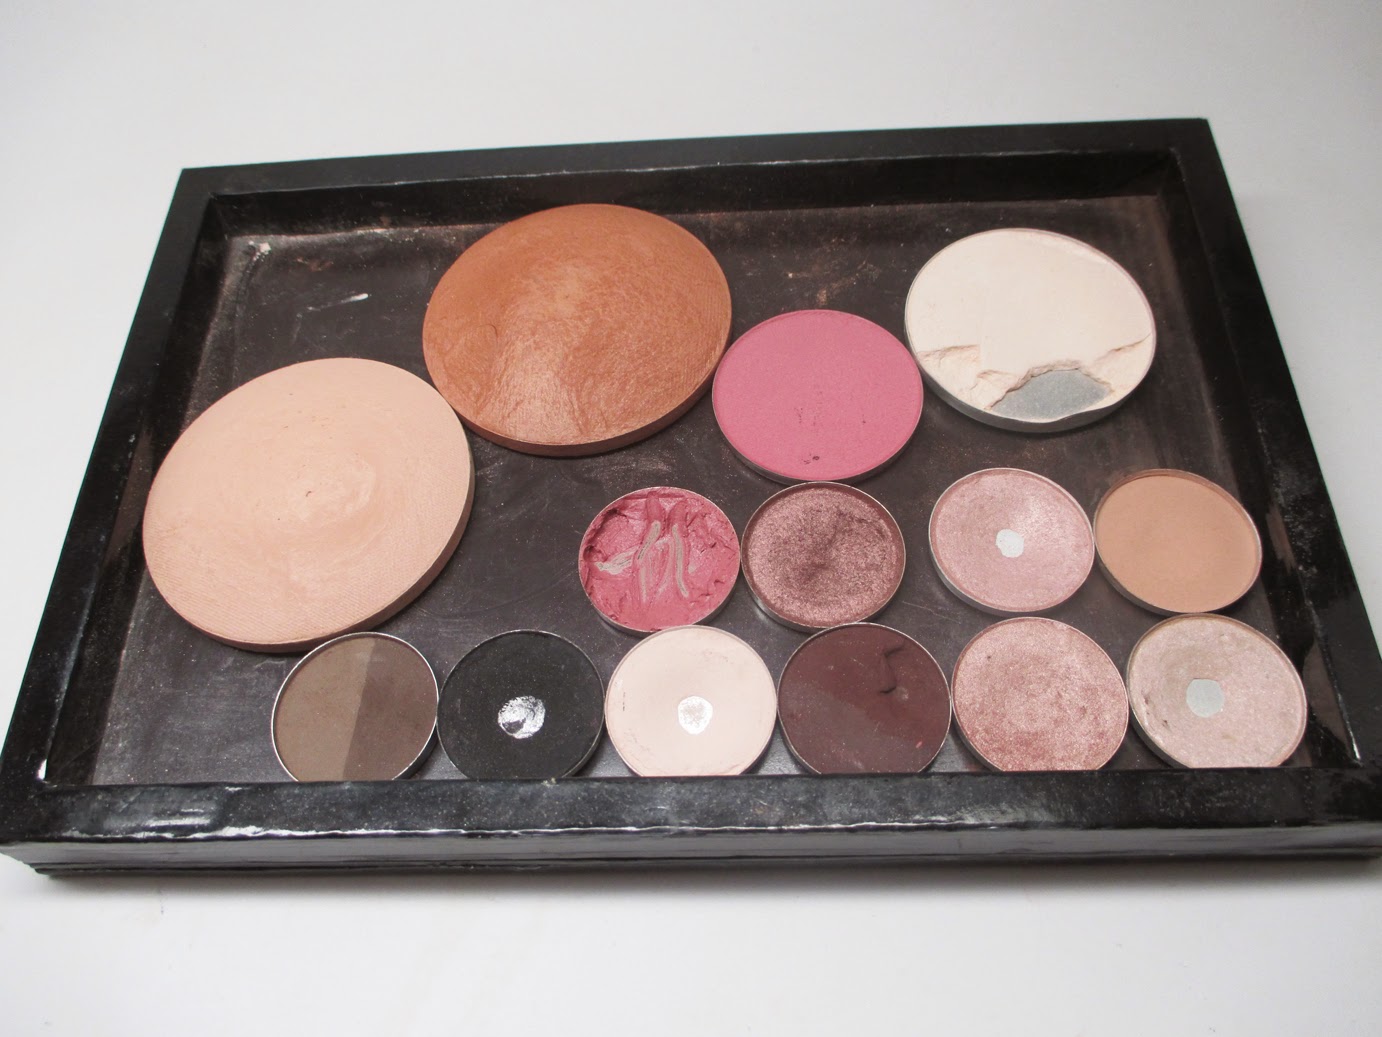 Best Way to Organize Your Makeup with Z Potter – Z Palette